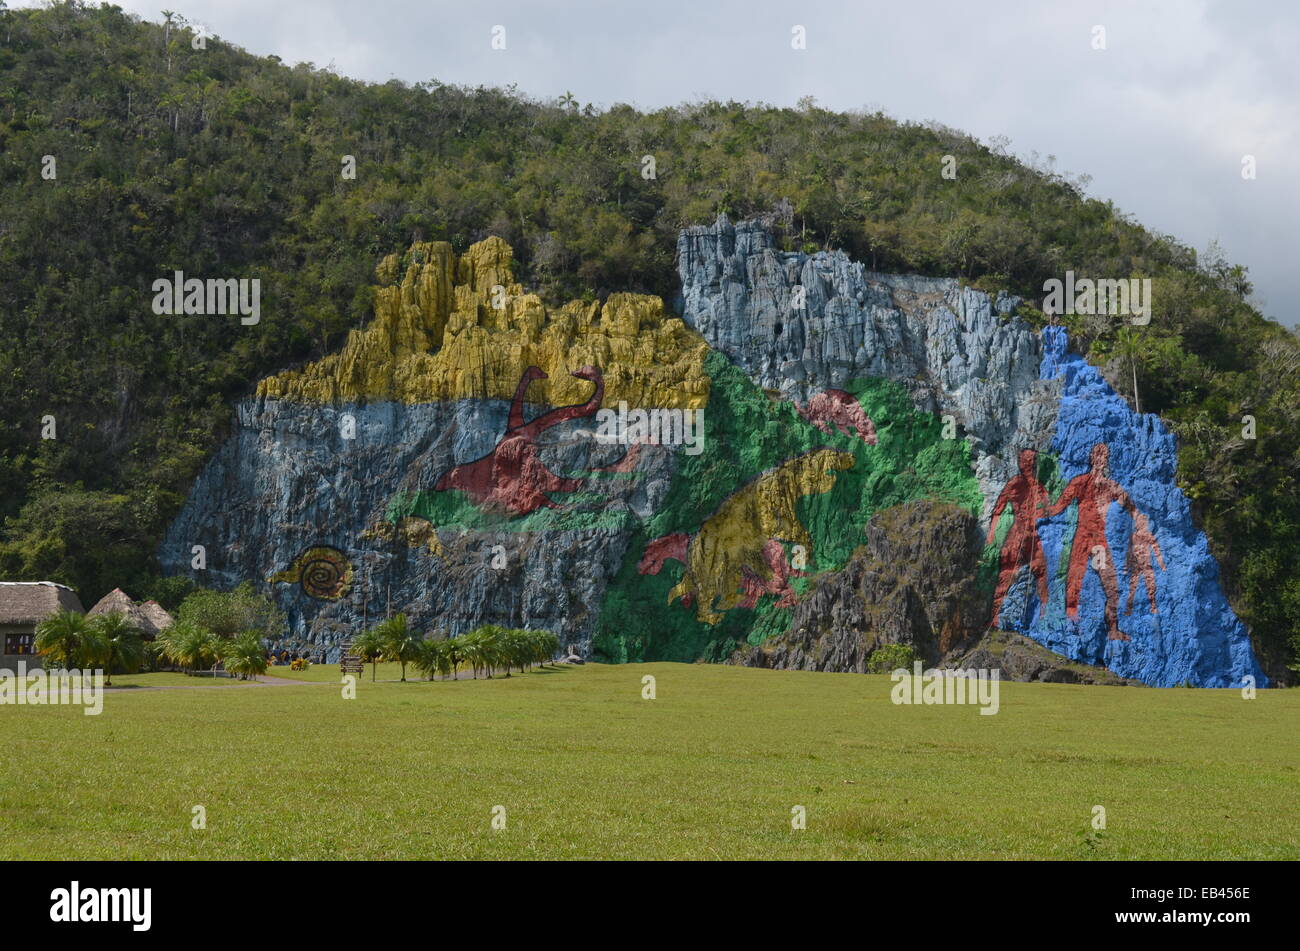 Mural de la Prehistoria, a giant mural painted on a cliff face in the Vinales area of Cuba. Stock Photo